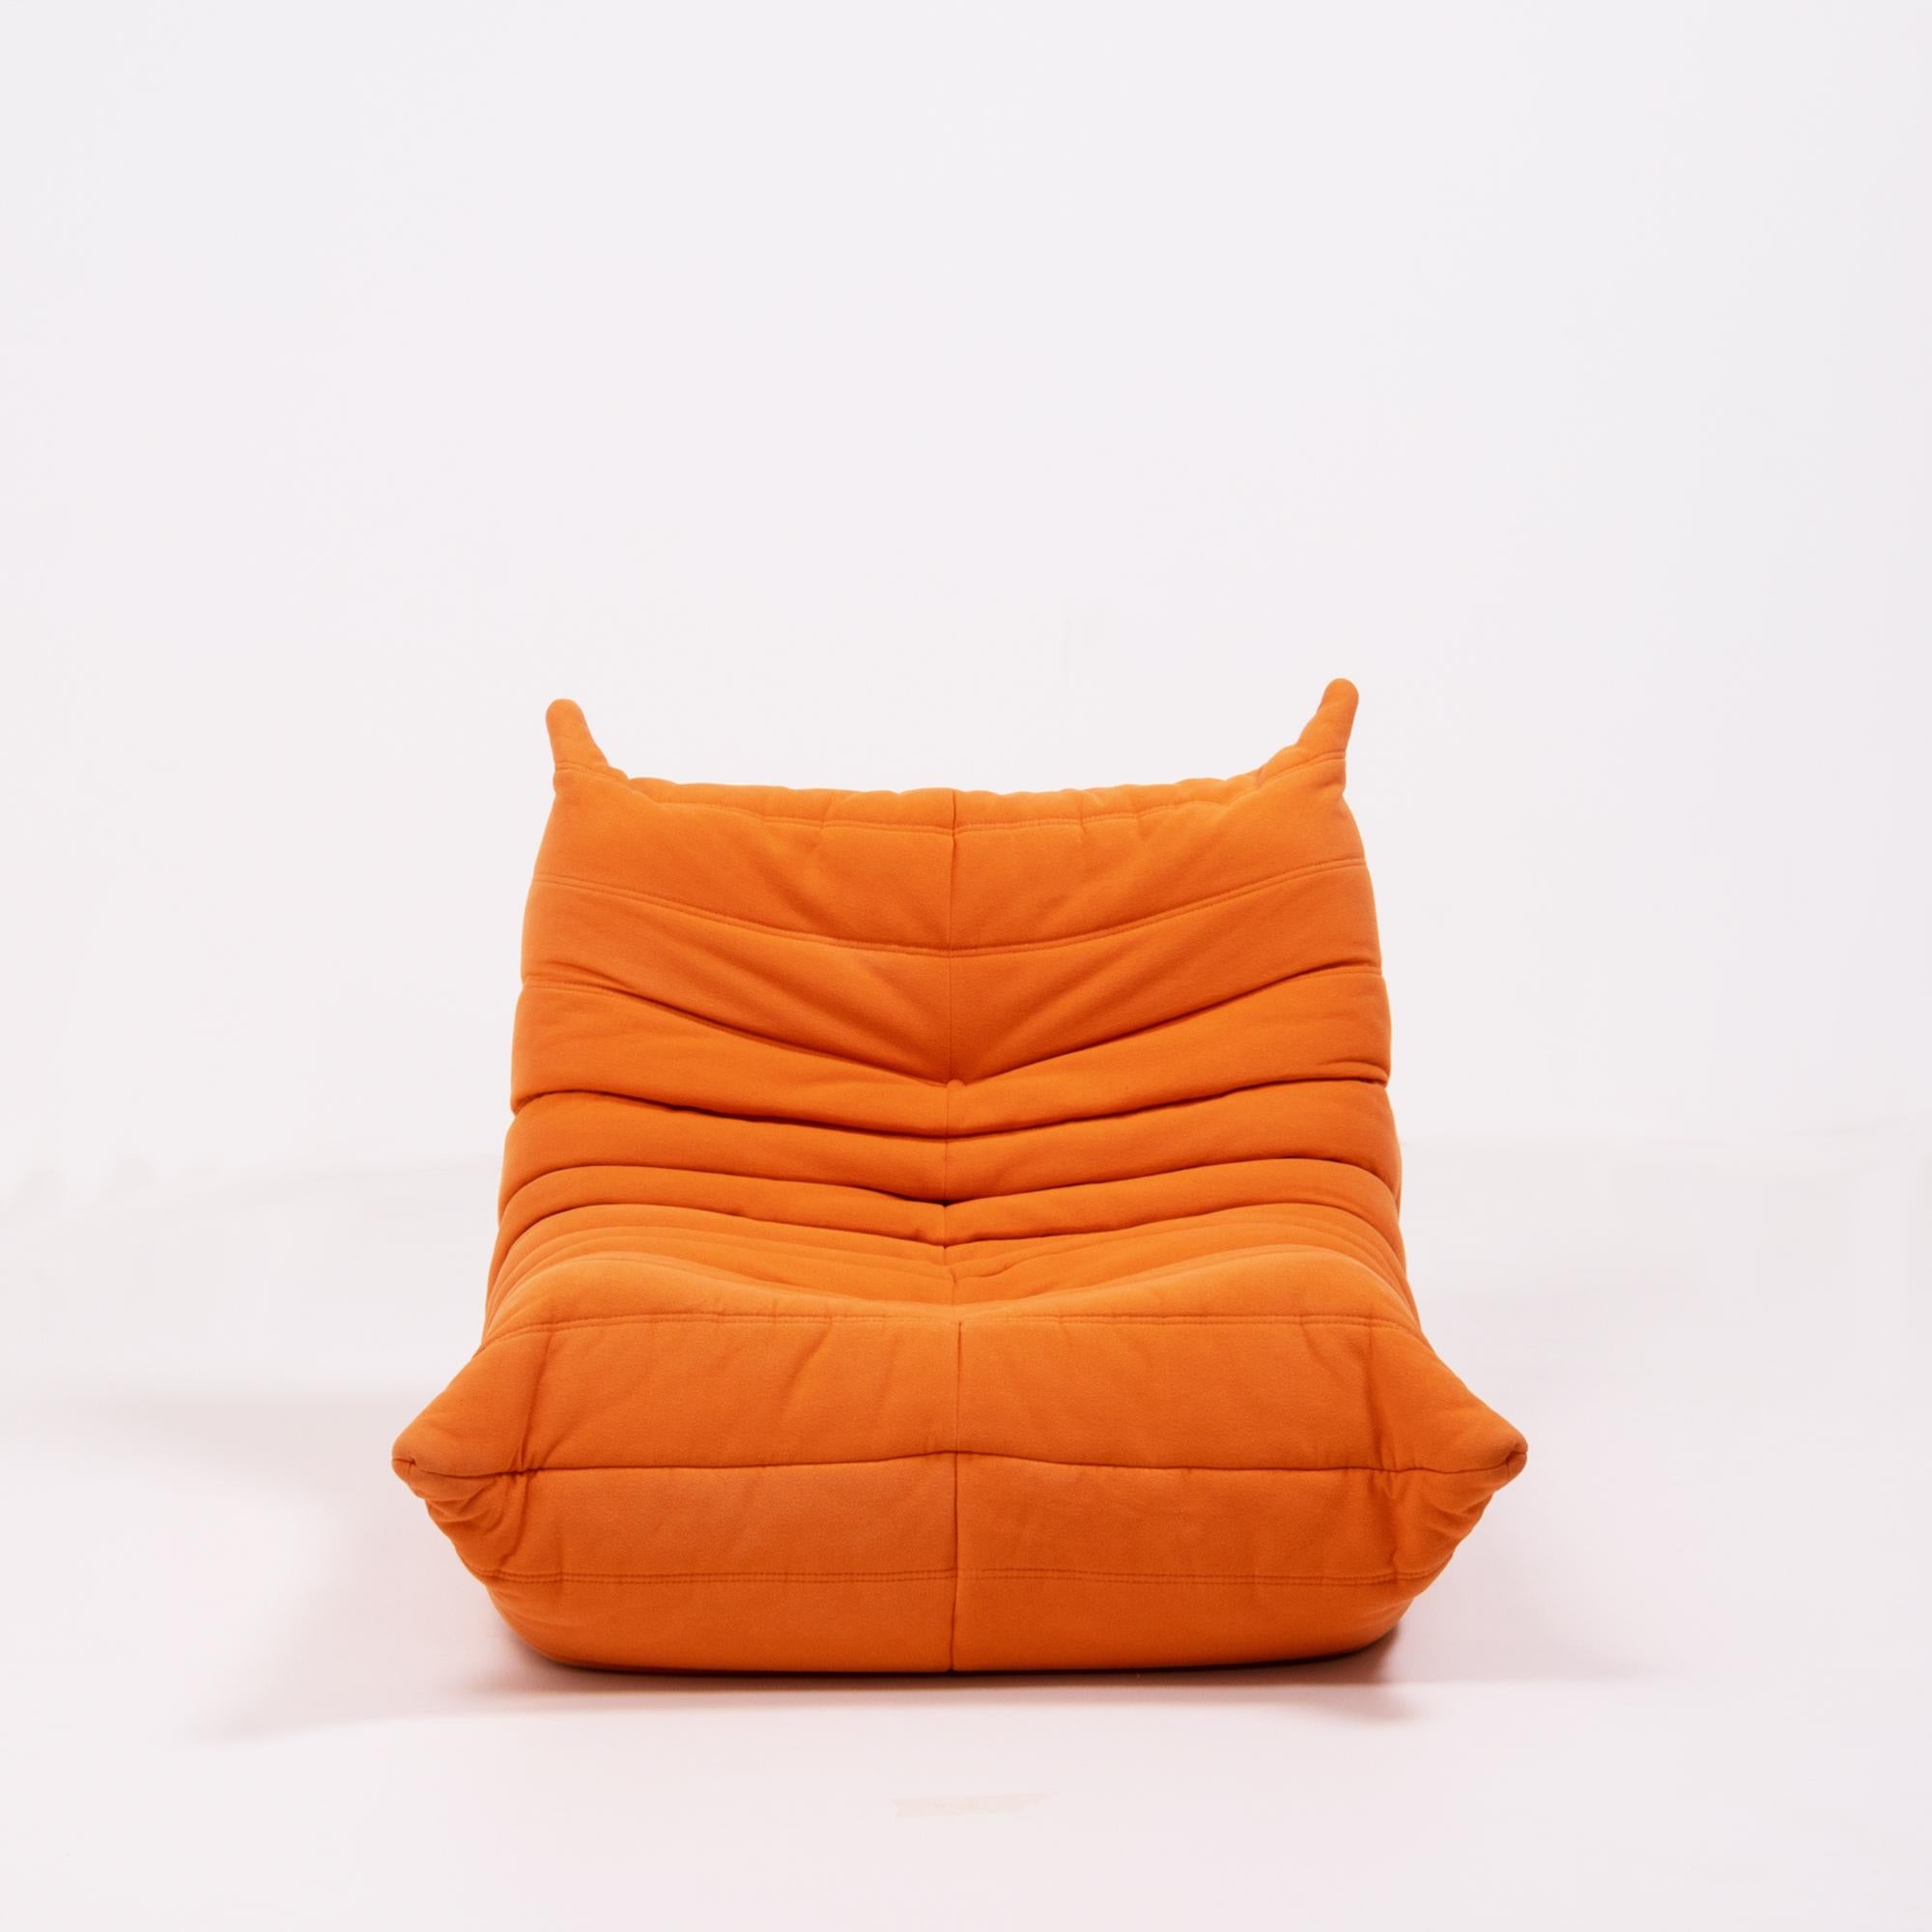 French Ligne Roset by Michel Ducaroy Togo Cadmium Orange Armchair and Footstool